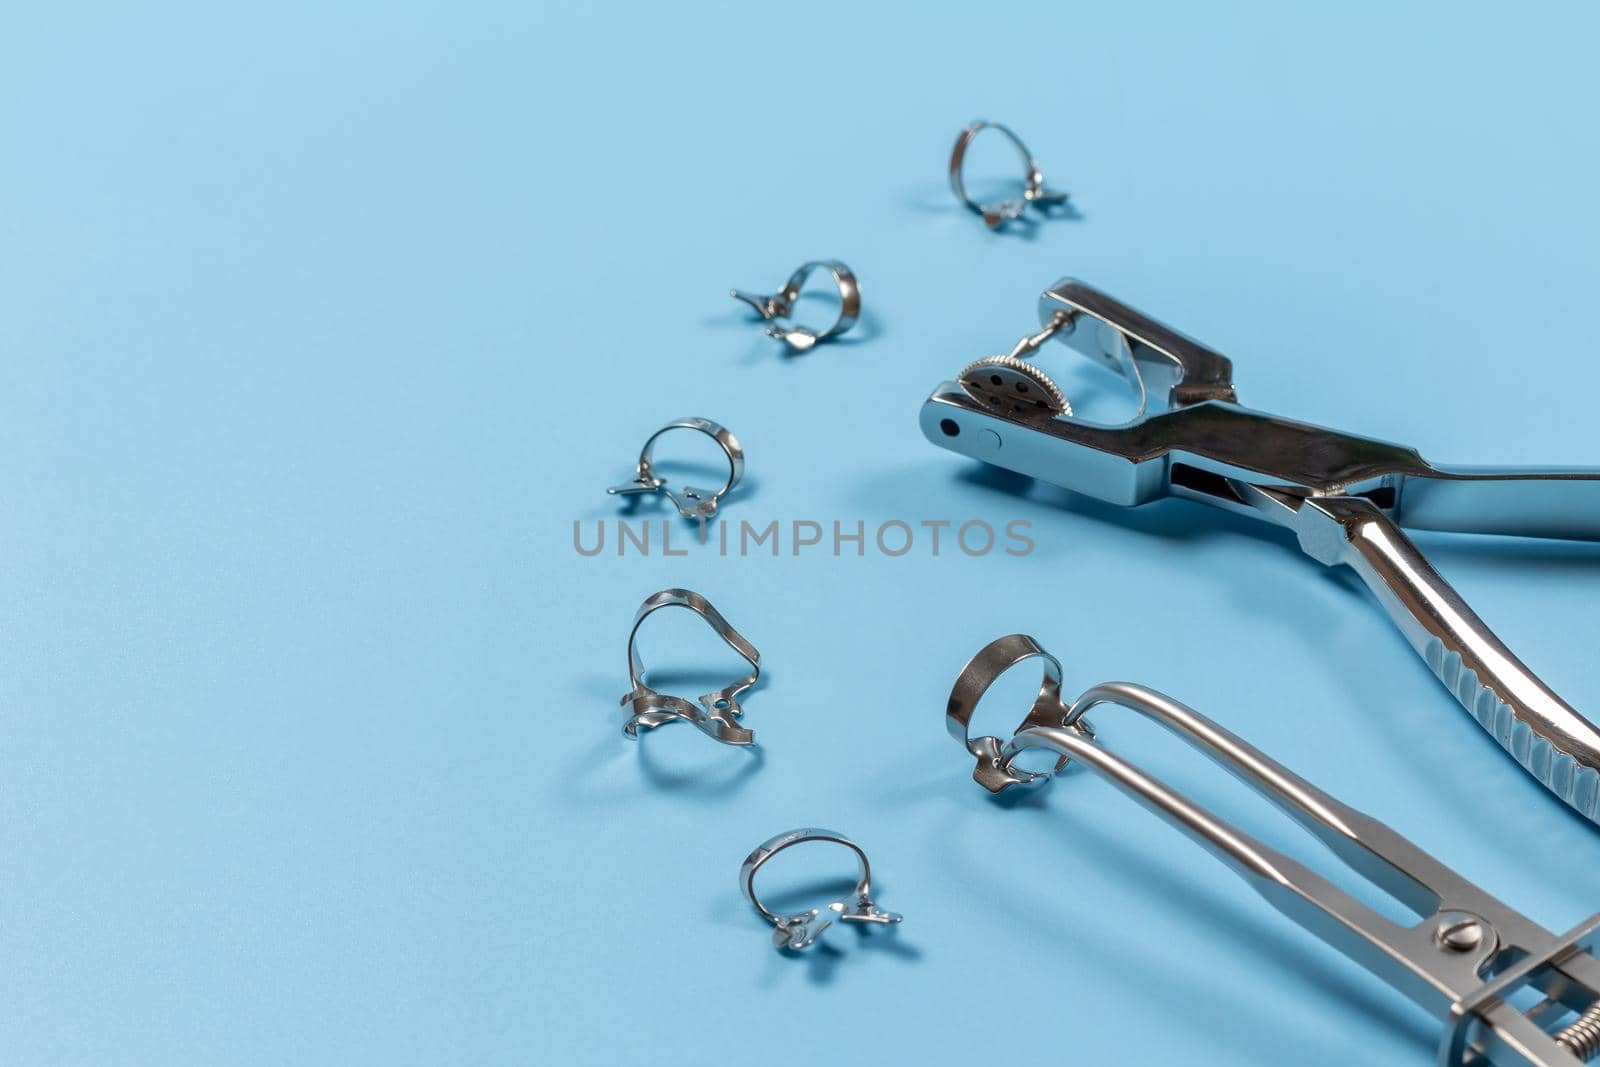 Dental hole punch, metal clamps and rubber dam forceps by mvg6894